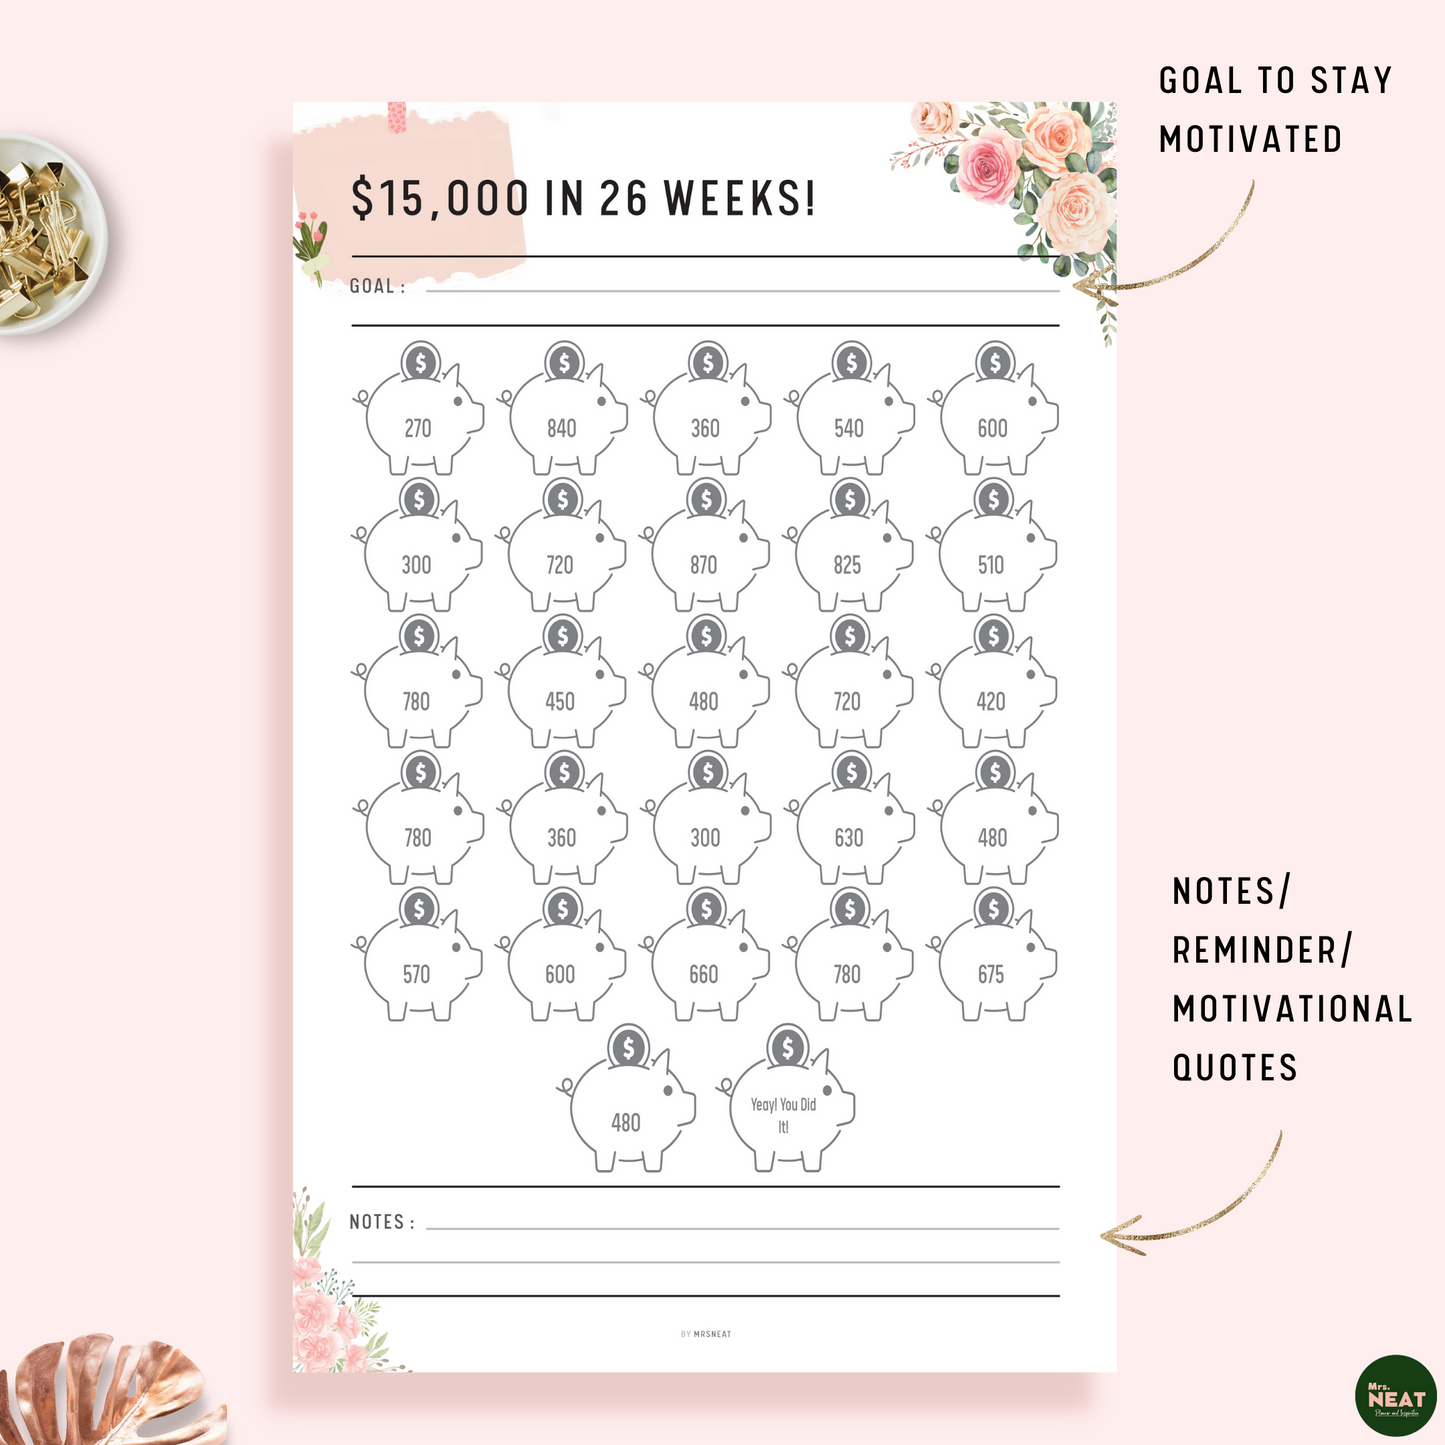 Beautiful Floral $15,000 Savings Challenge in 26 Weeks Planner with goal to help you stay motivated